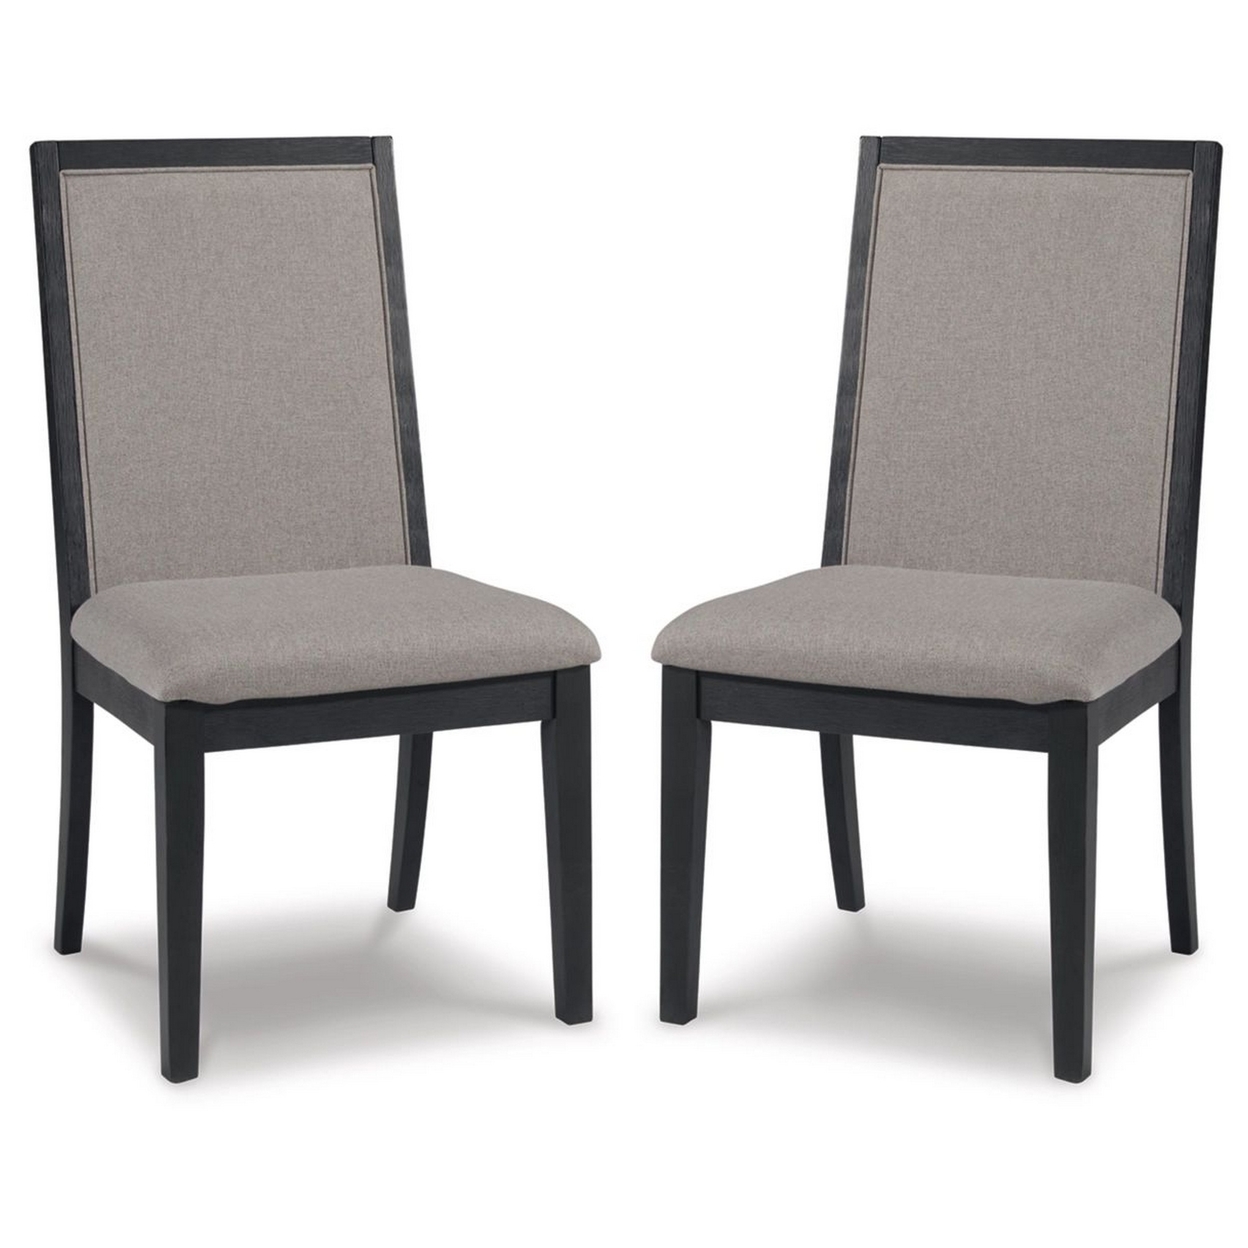 24 Inch Dining Side Chairs, Cushioned, Light Gray Polyester Upholstery- Saltoro Sherpi